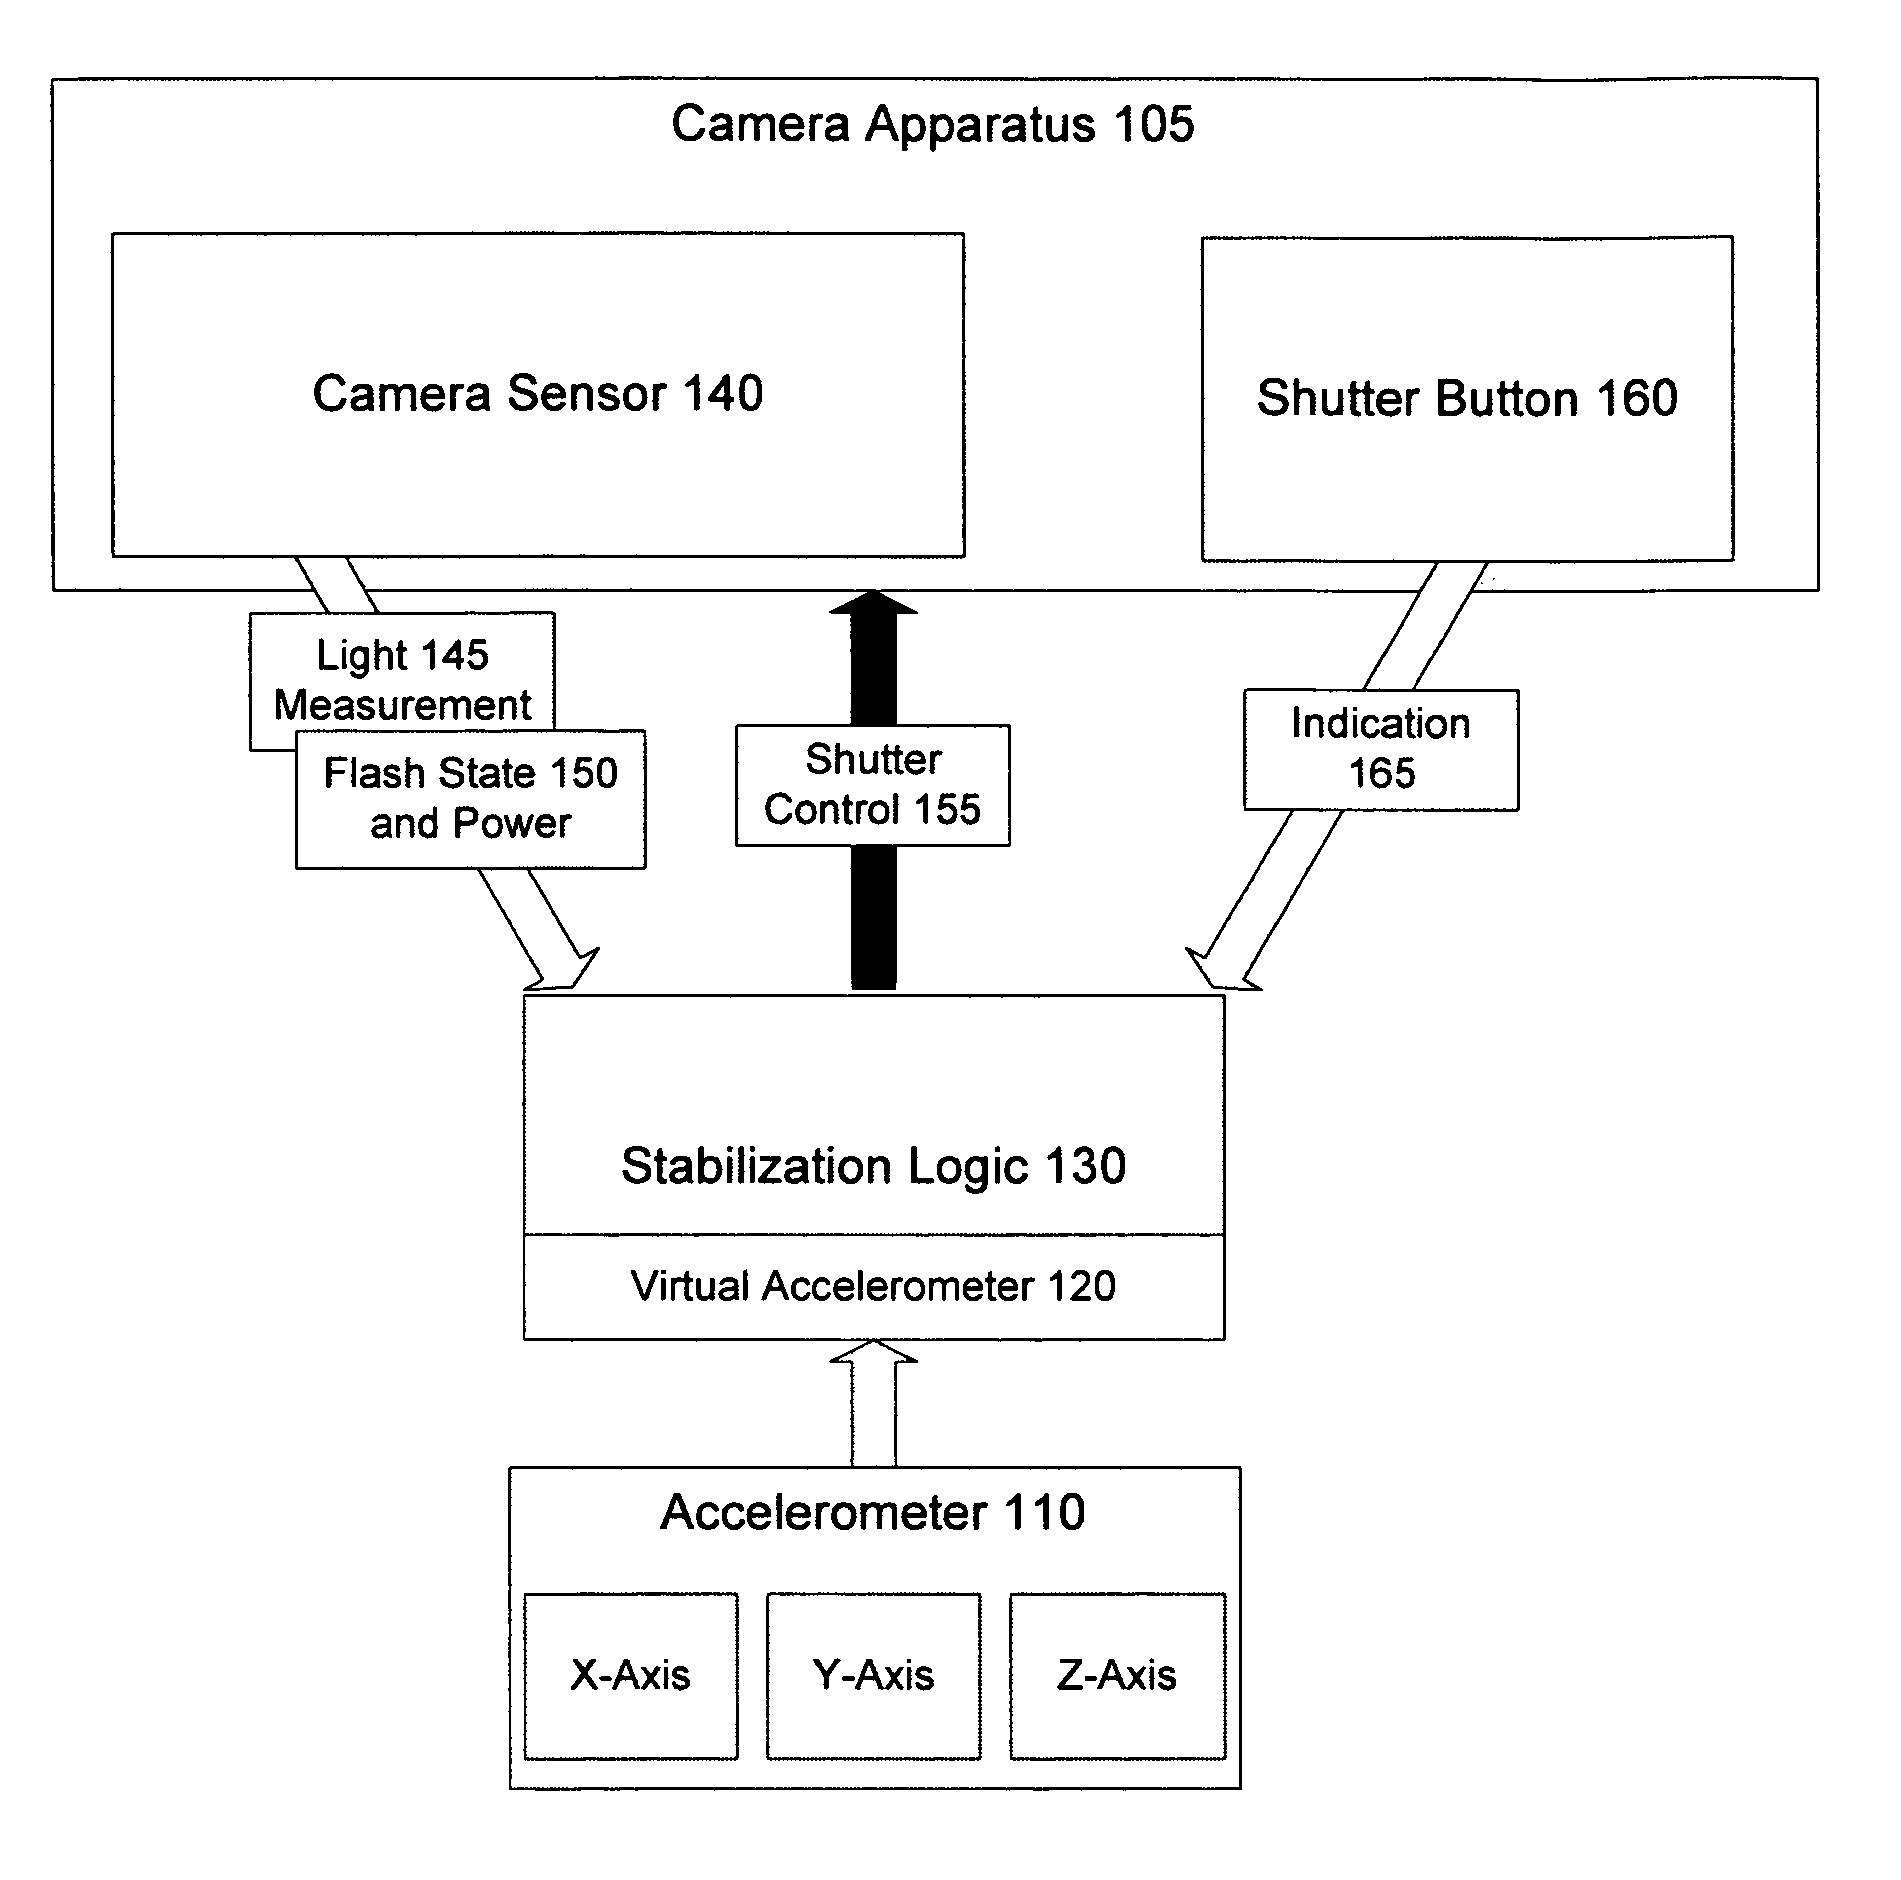 Method and apparatus to provide improved image quality in a camera